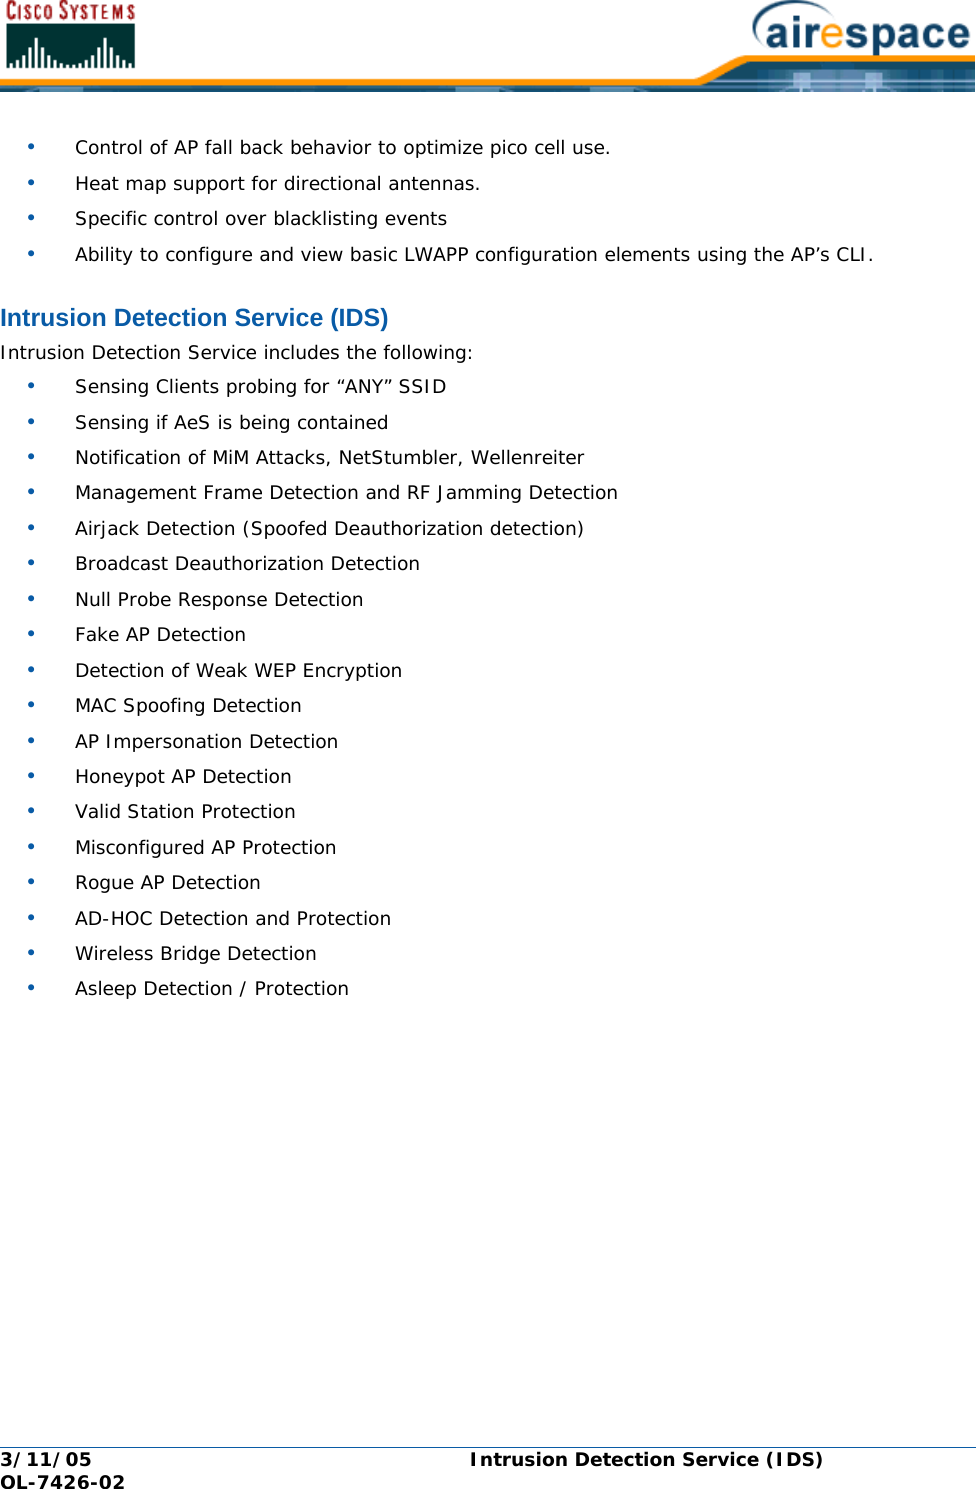 3/11/05 Intrusion Detection Service (IDS)  OL-7426-02•Control of AP fall back behavior to optimize pico cell use.•Heat map support for directional antennas.•Specific control over blacklisting events•Ability to configure and view basic LWAPP configuration elements using the AP’s CLI.Intrusion Detection Service (IDS)Intrusion Detection Service (IDS)Intrusion Detection Service includes the following:•Sensing Clients probing for “ANY” SSID•Sensing if AeS is being contained•Notification of MiM Attacks, NetStumbler, Wellenreiter•Management Frame Detection and RF Jamming Detection•Airjack Detection (Spoofed Deauthorization detection)•Broadcast Deauthorization Detection•Null Probe Response Detection•Fake AP Detection•Detection of Weak WEP Encryption•MAC Spoofing Detection•AP Impersonation Detection•Honeypot AP Detection•Valid Station Protection•Misconfigured AP Protection•Rogue AP Detection•AD-HOC Detection and Protection•Wireless Bridge Detection•Asleep Detection / Protection